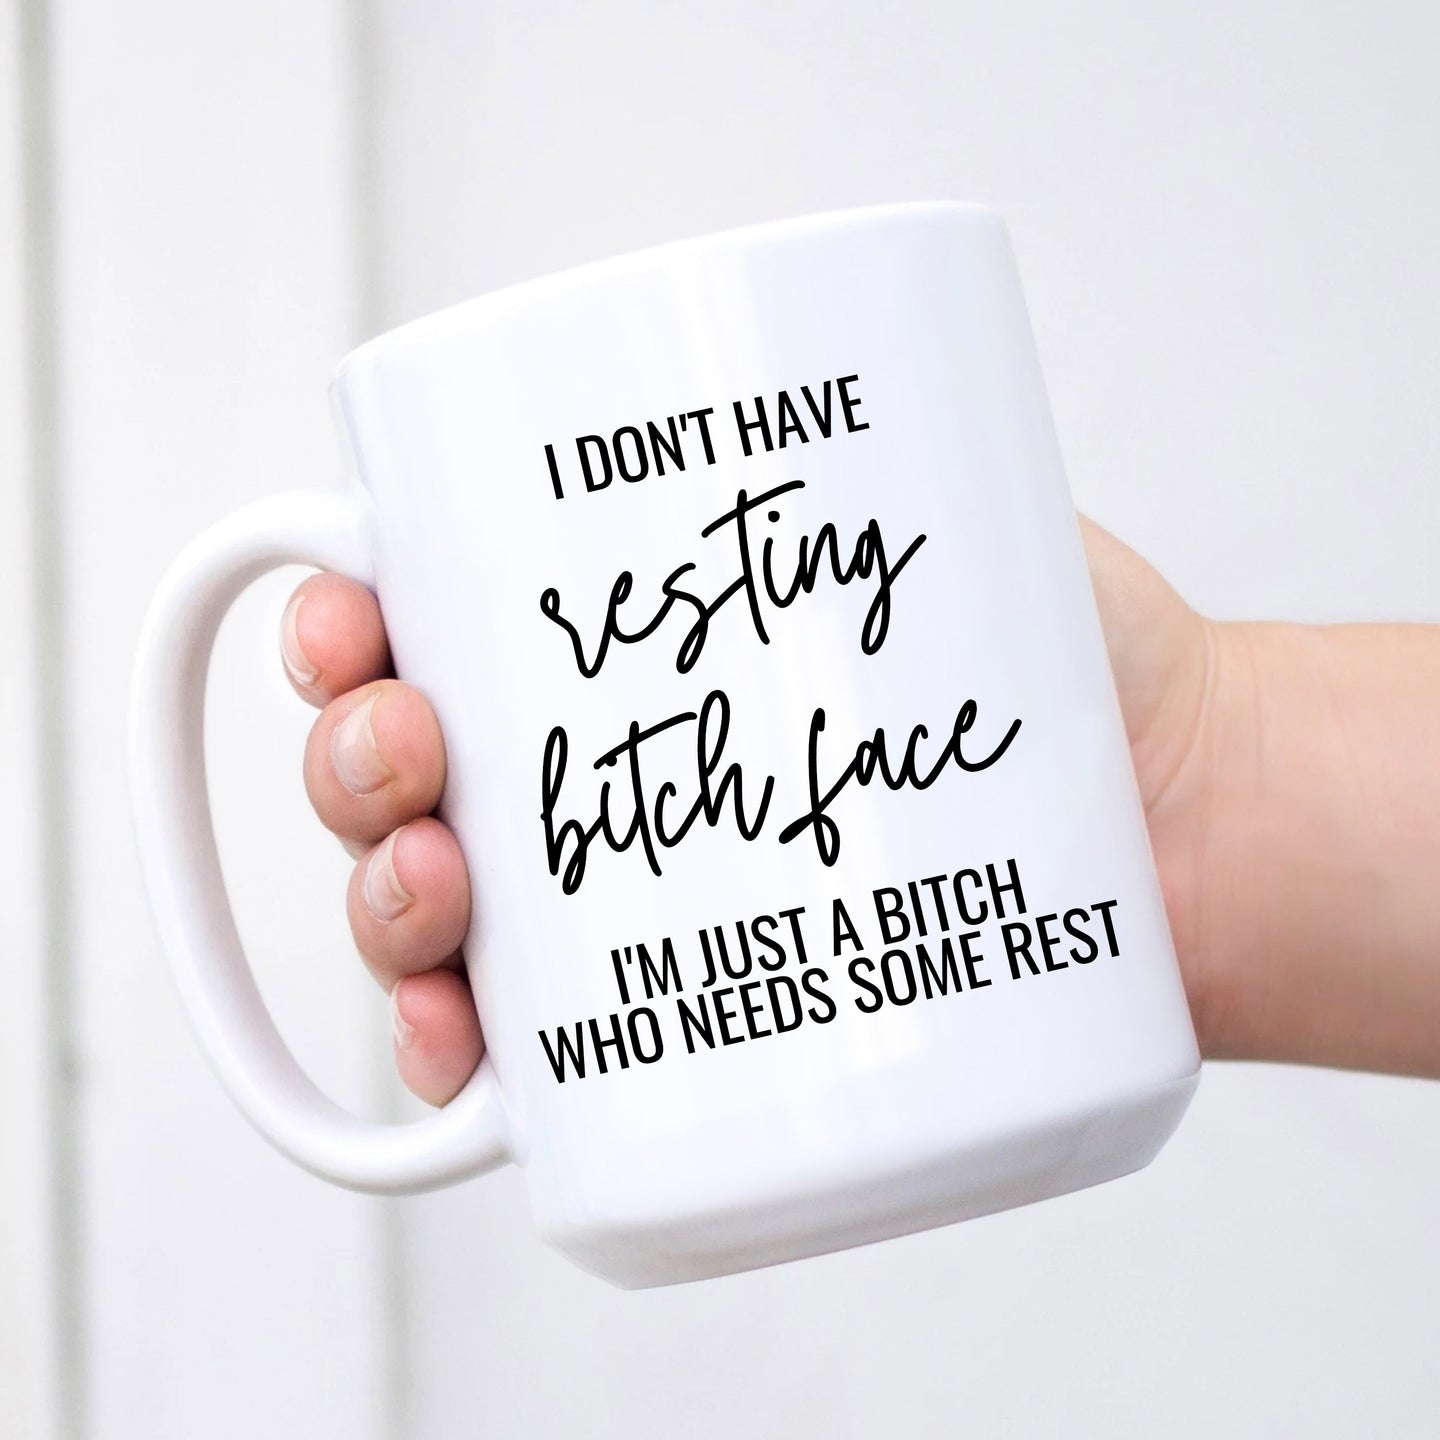 I don't have resting bitch face. I'm just a bitch who needs some rest.